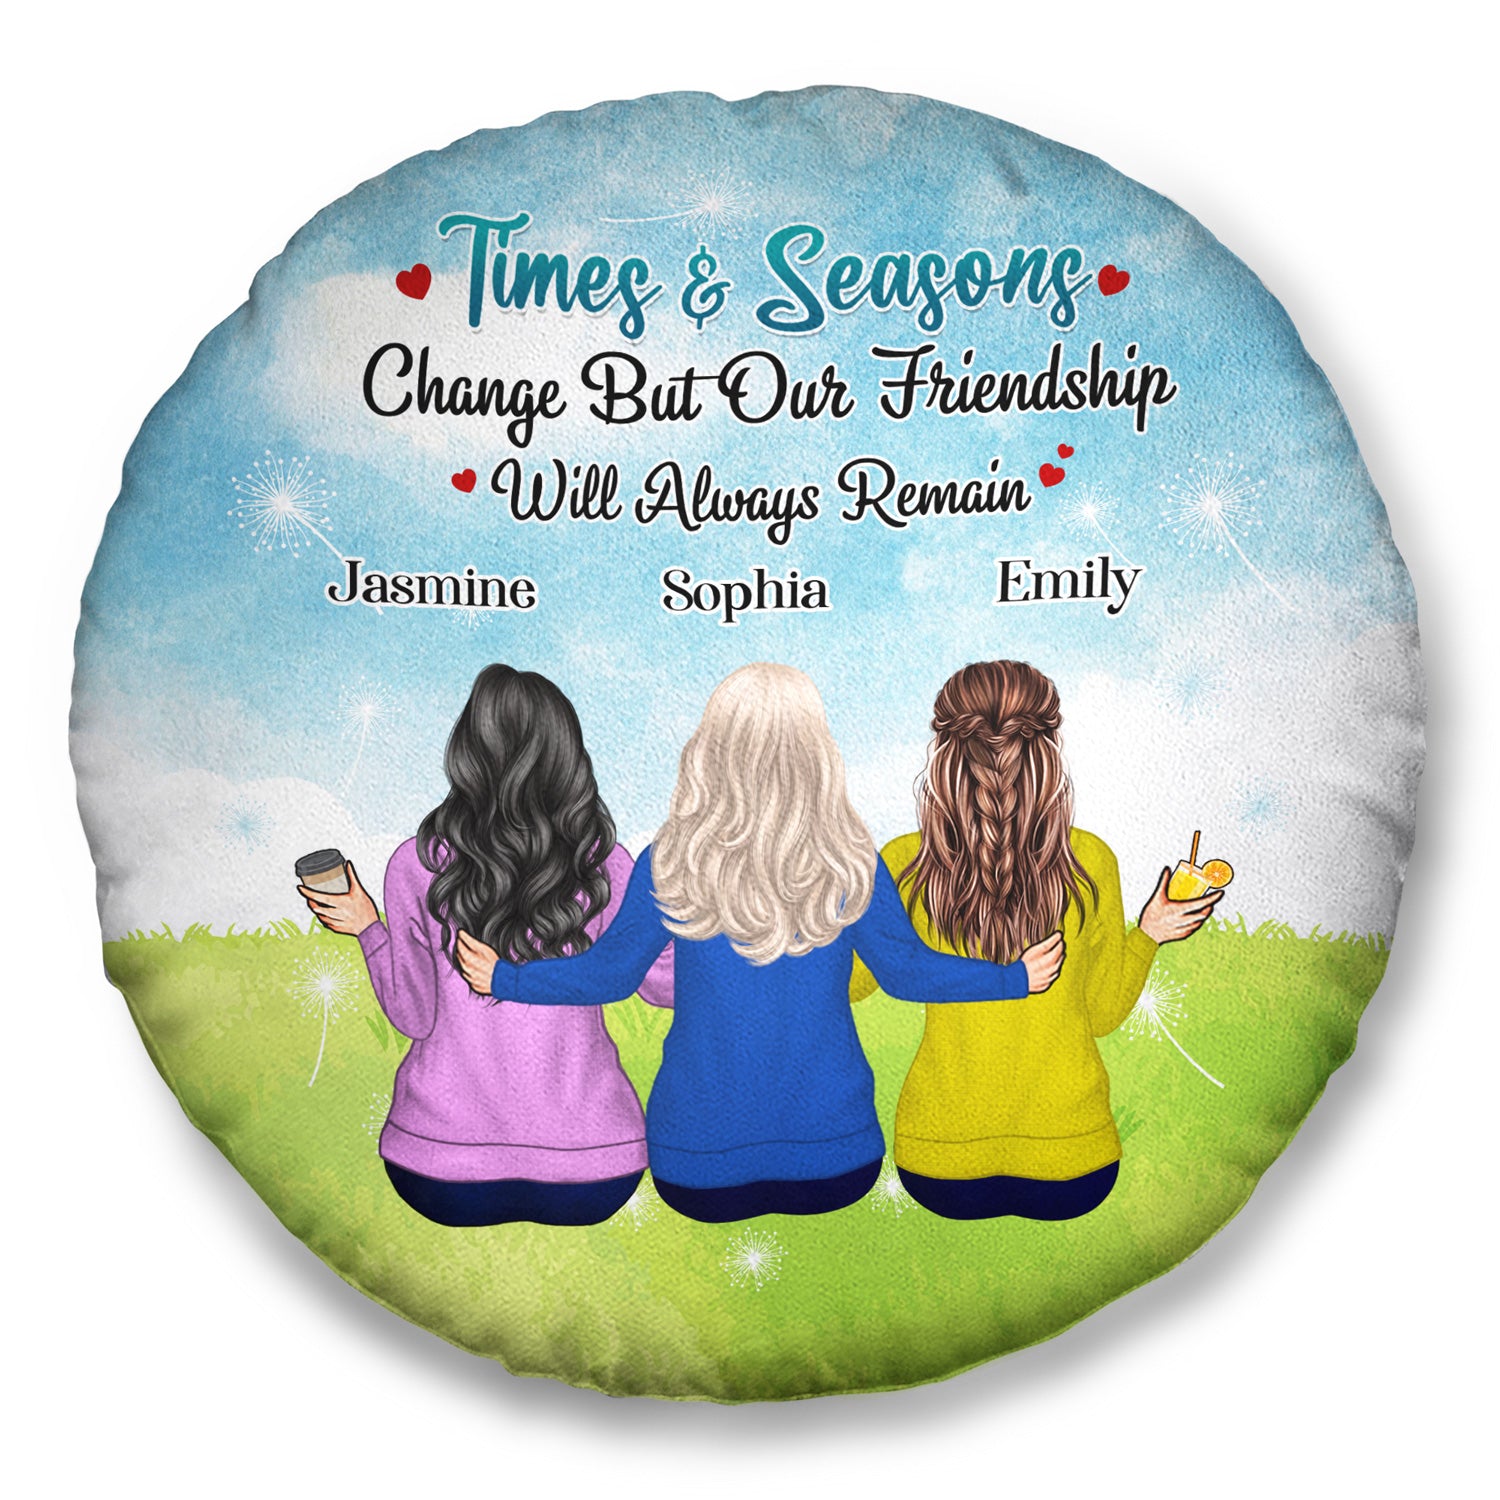 Our Friendship Will Always Remain - Birthday Gift For Besties, BFF Best Friends, Siblings, Sisters, Girls - Personalized Custom Round Pillow